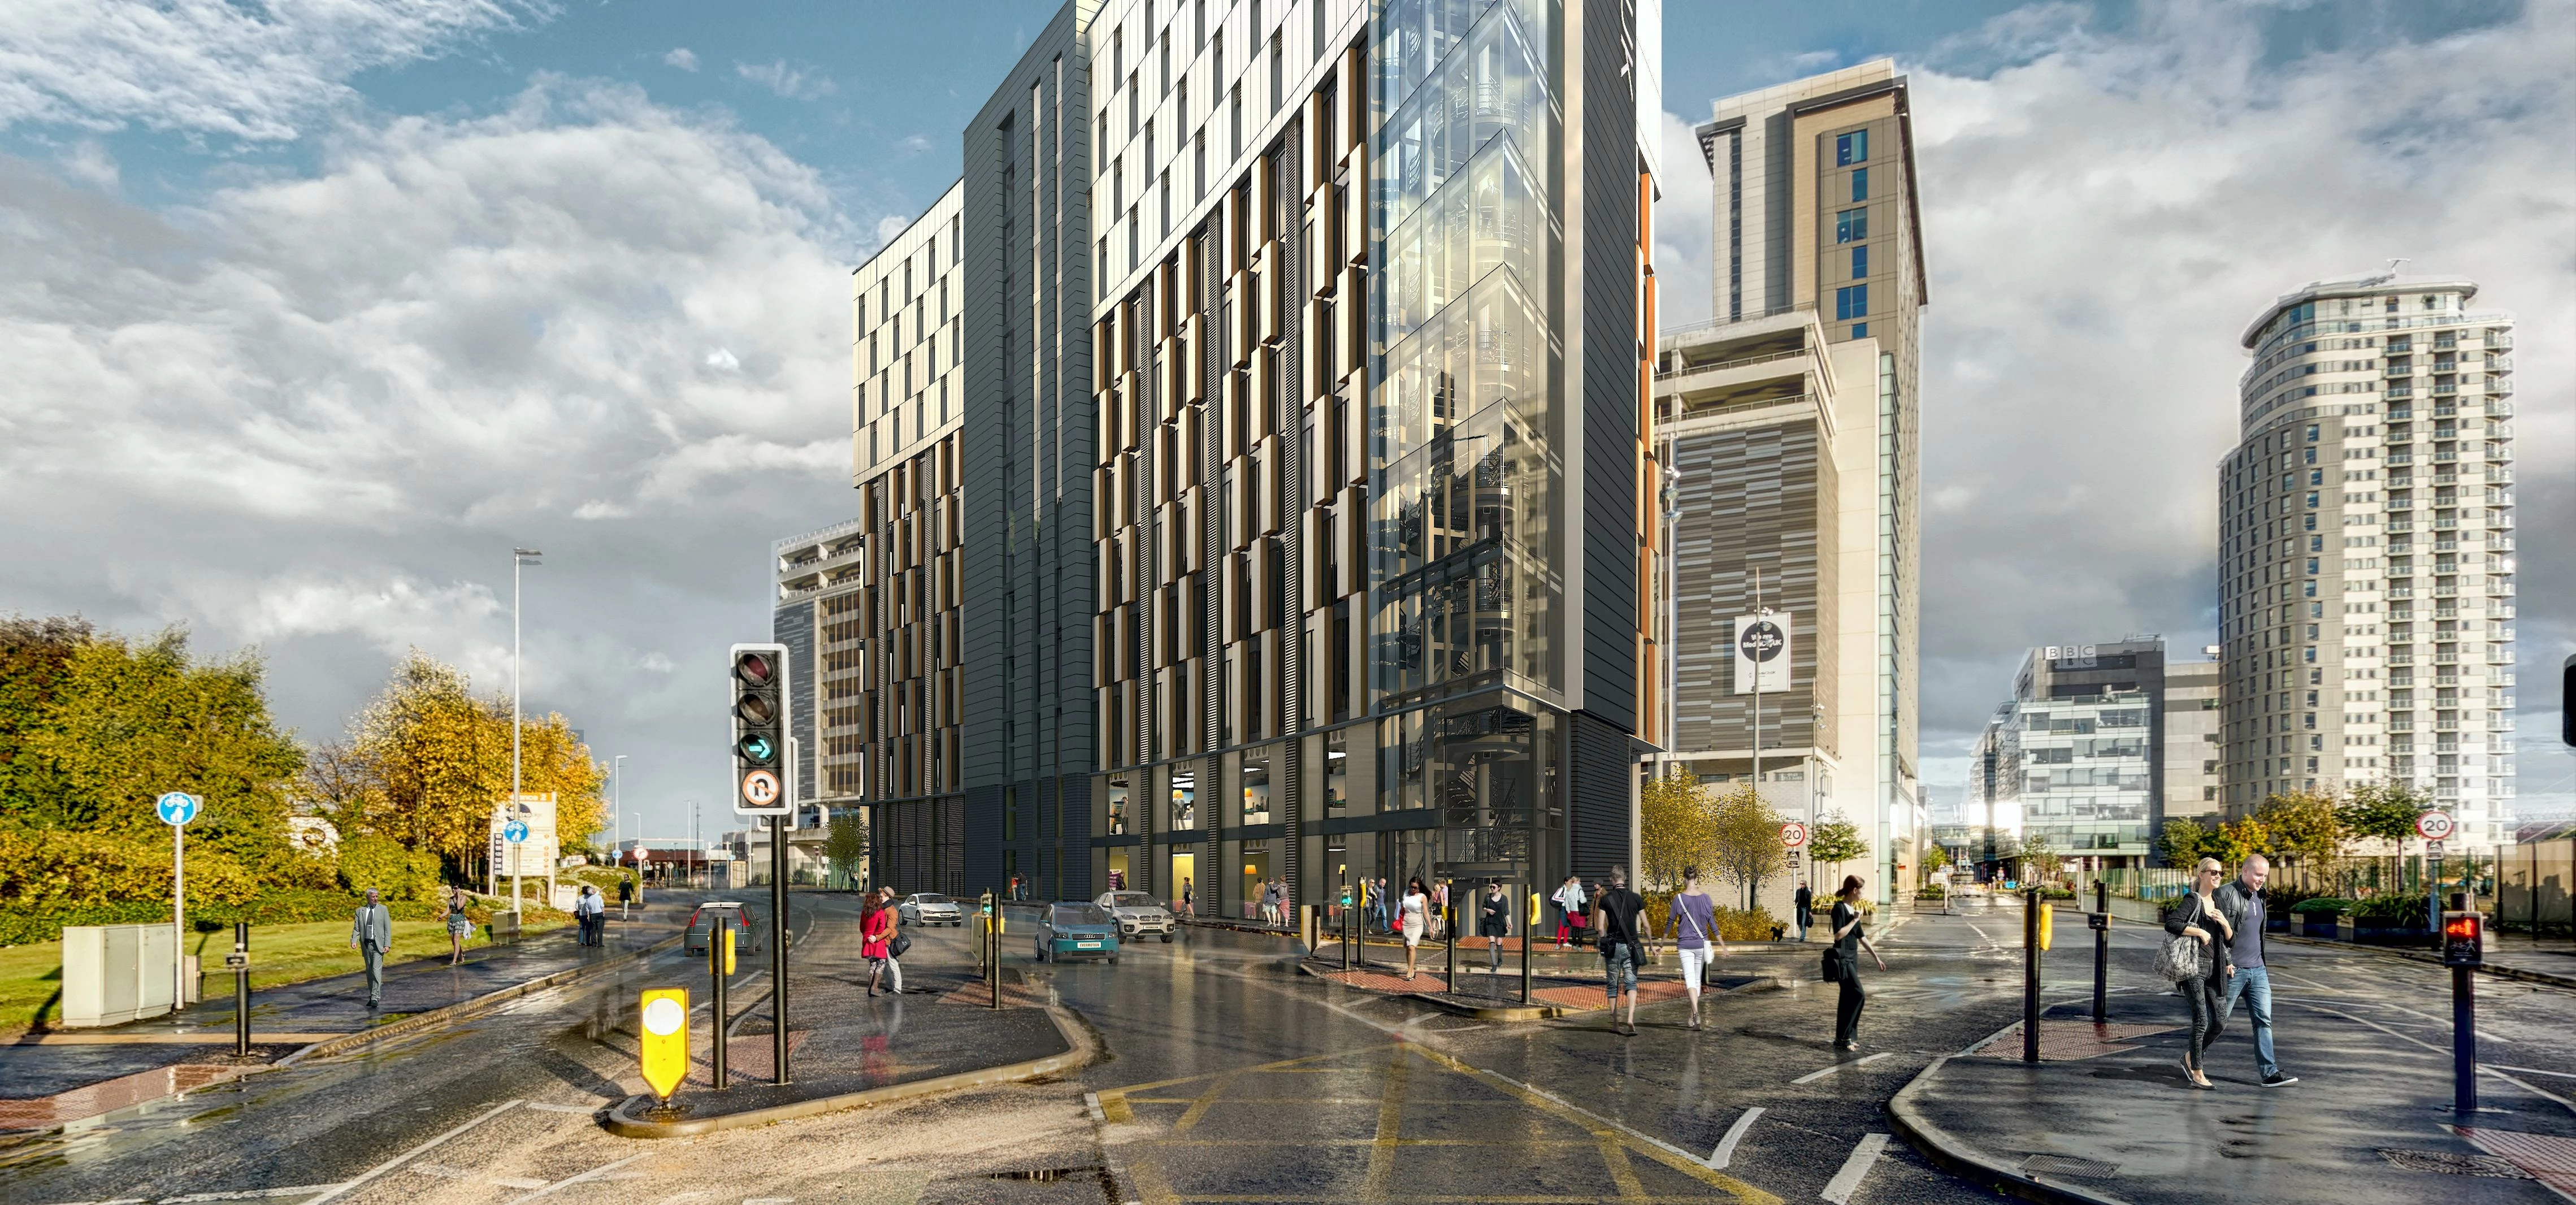 A CG image of the upcoming Premier Inn, being built as part of the Tomorrow development at MediaCity